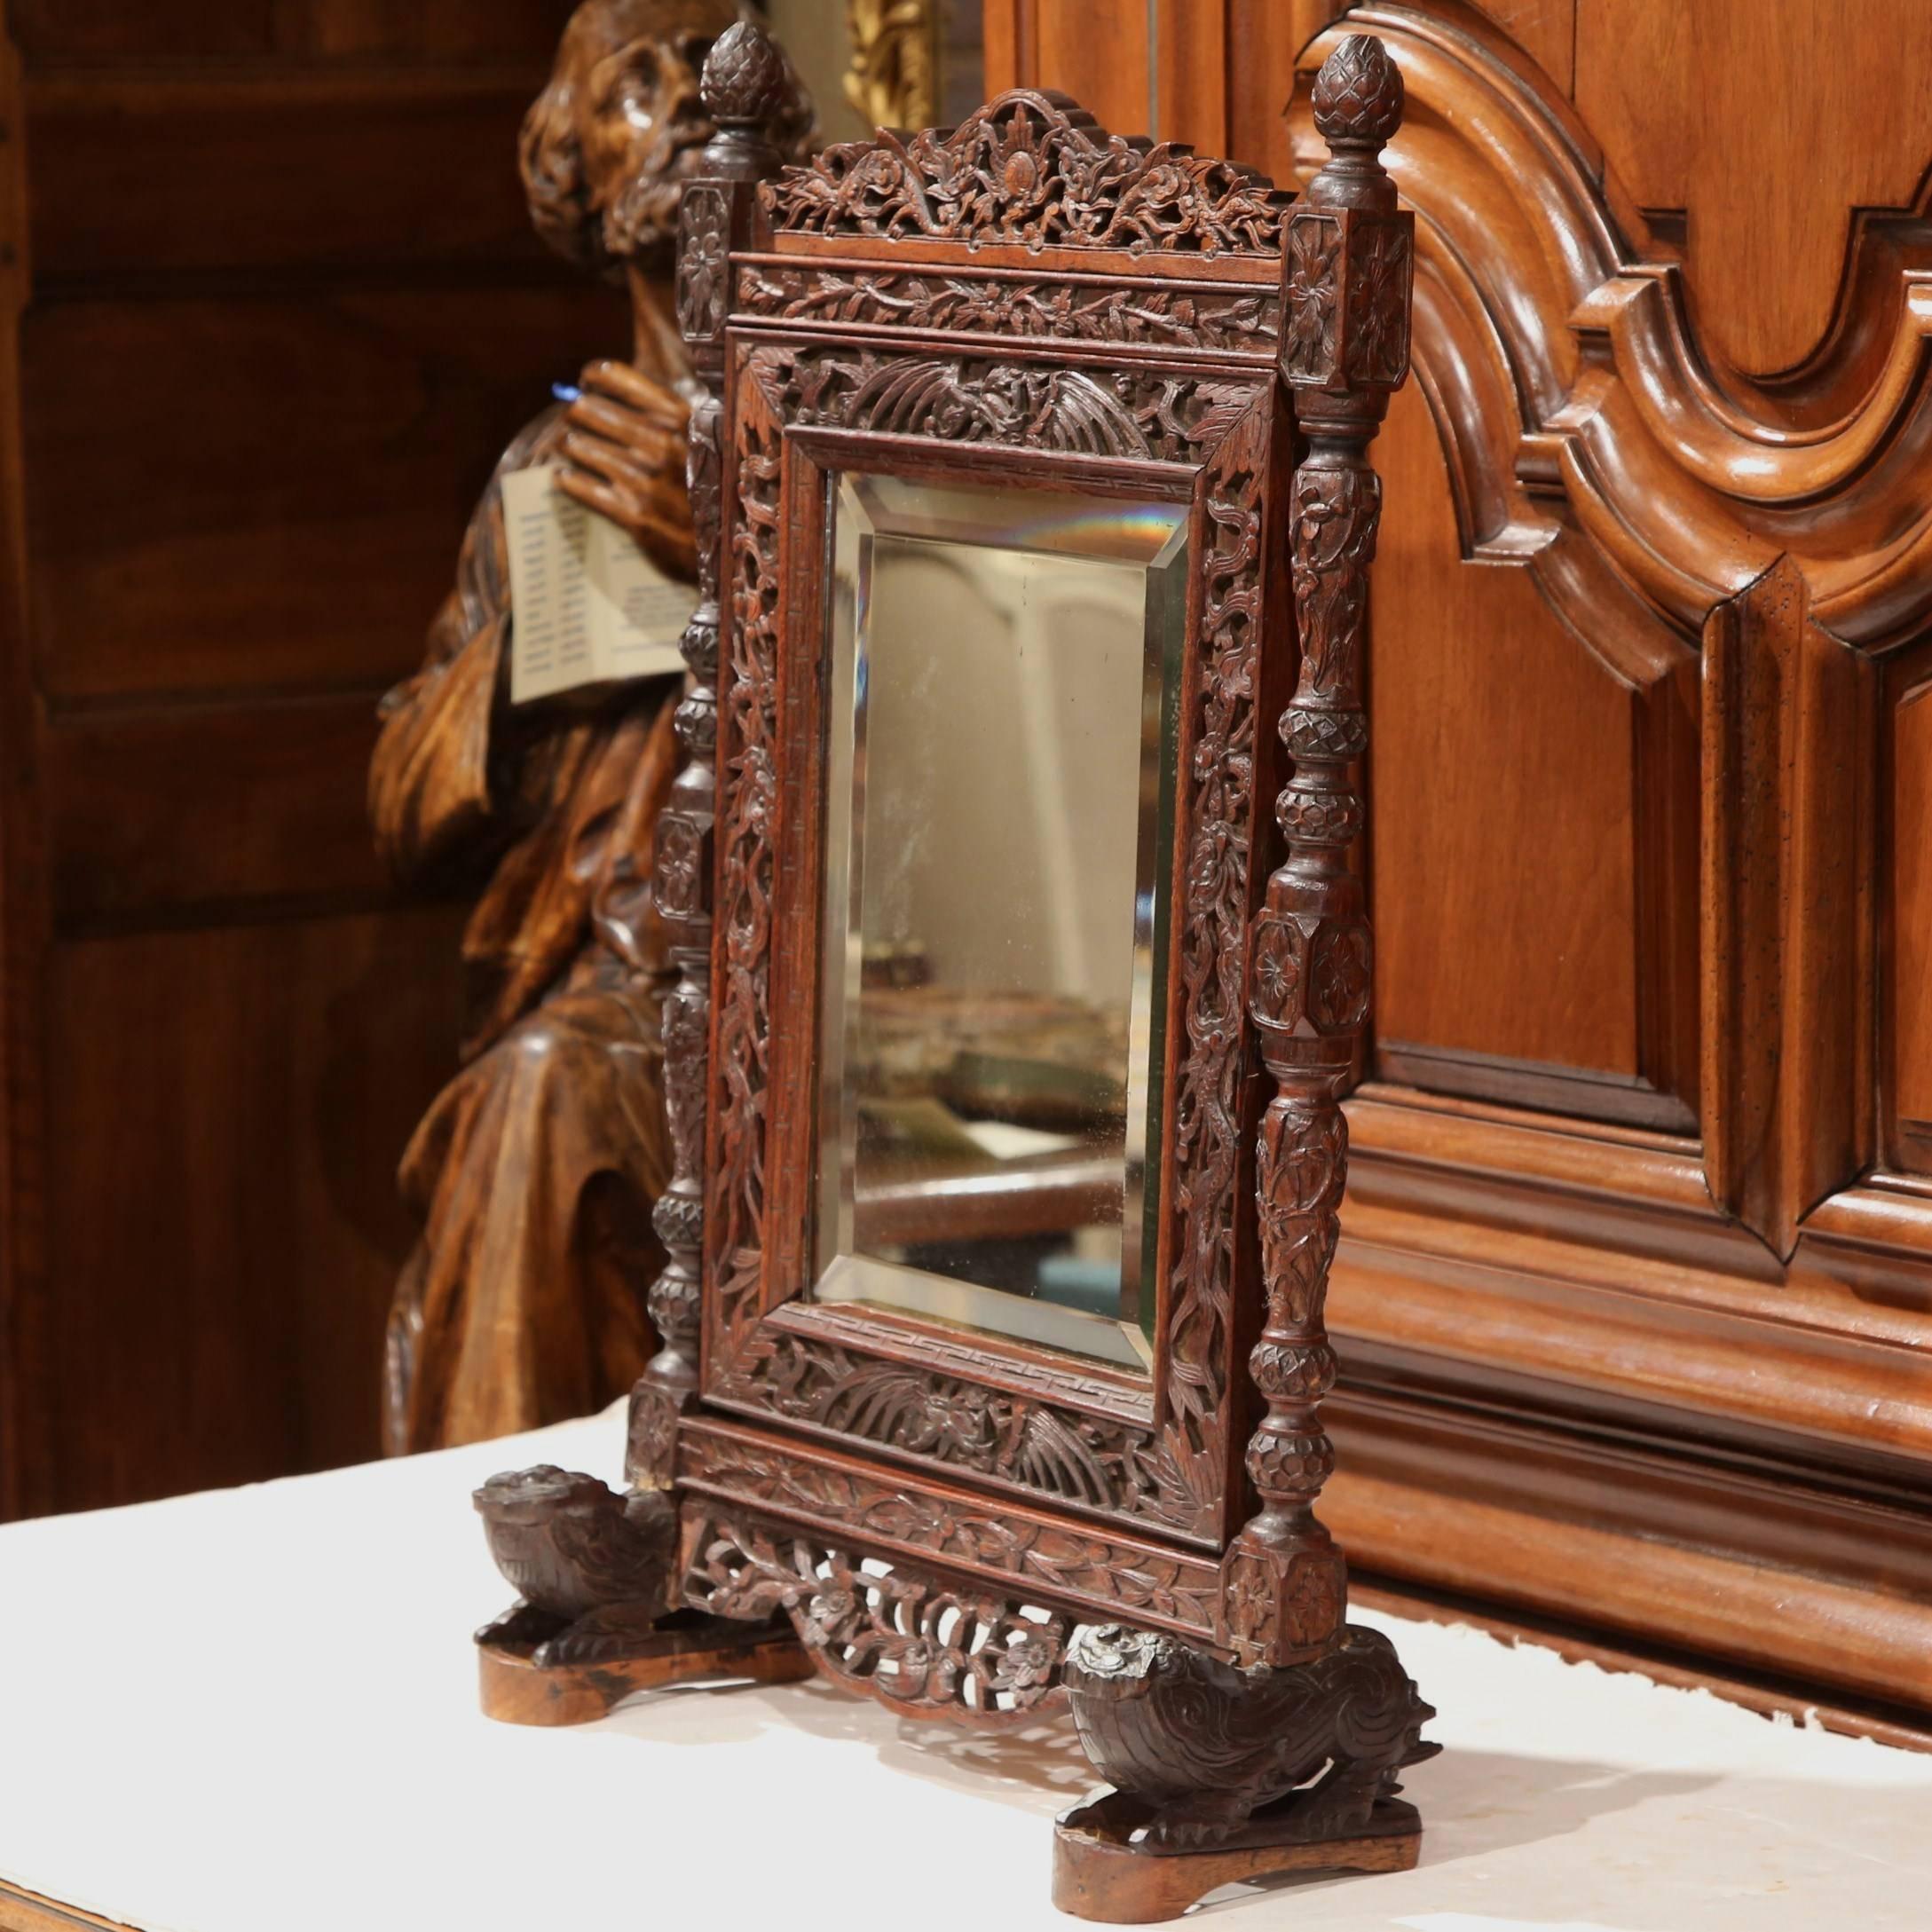 Decorate a counter with this elegant antique makeup mirror frame from the Alps of France. Crafted, circa 1860, the rectangular, tilt-top mirror with beveled glass sits on two pedestal legs and features Fine, intricate floral and foliage carvings